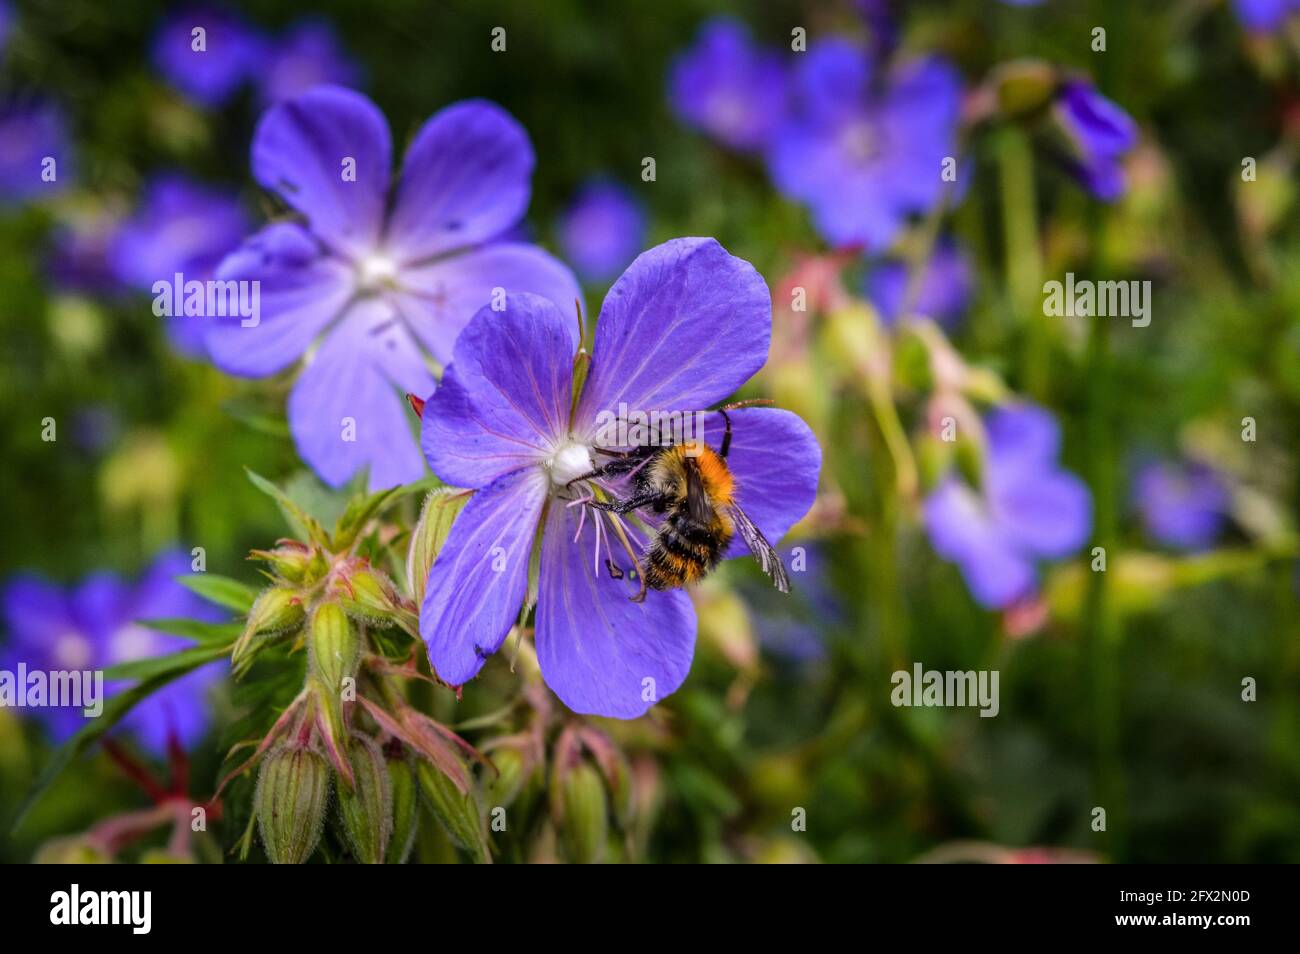 A Bee On A Flower In Summer Stock Photo